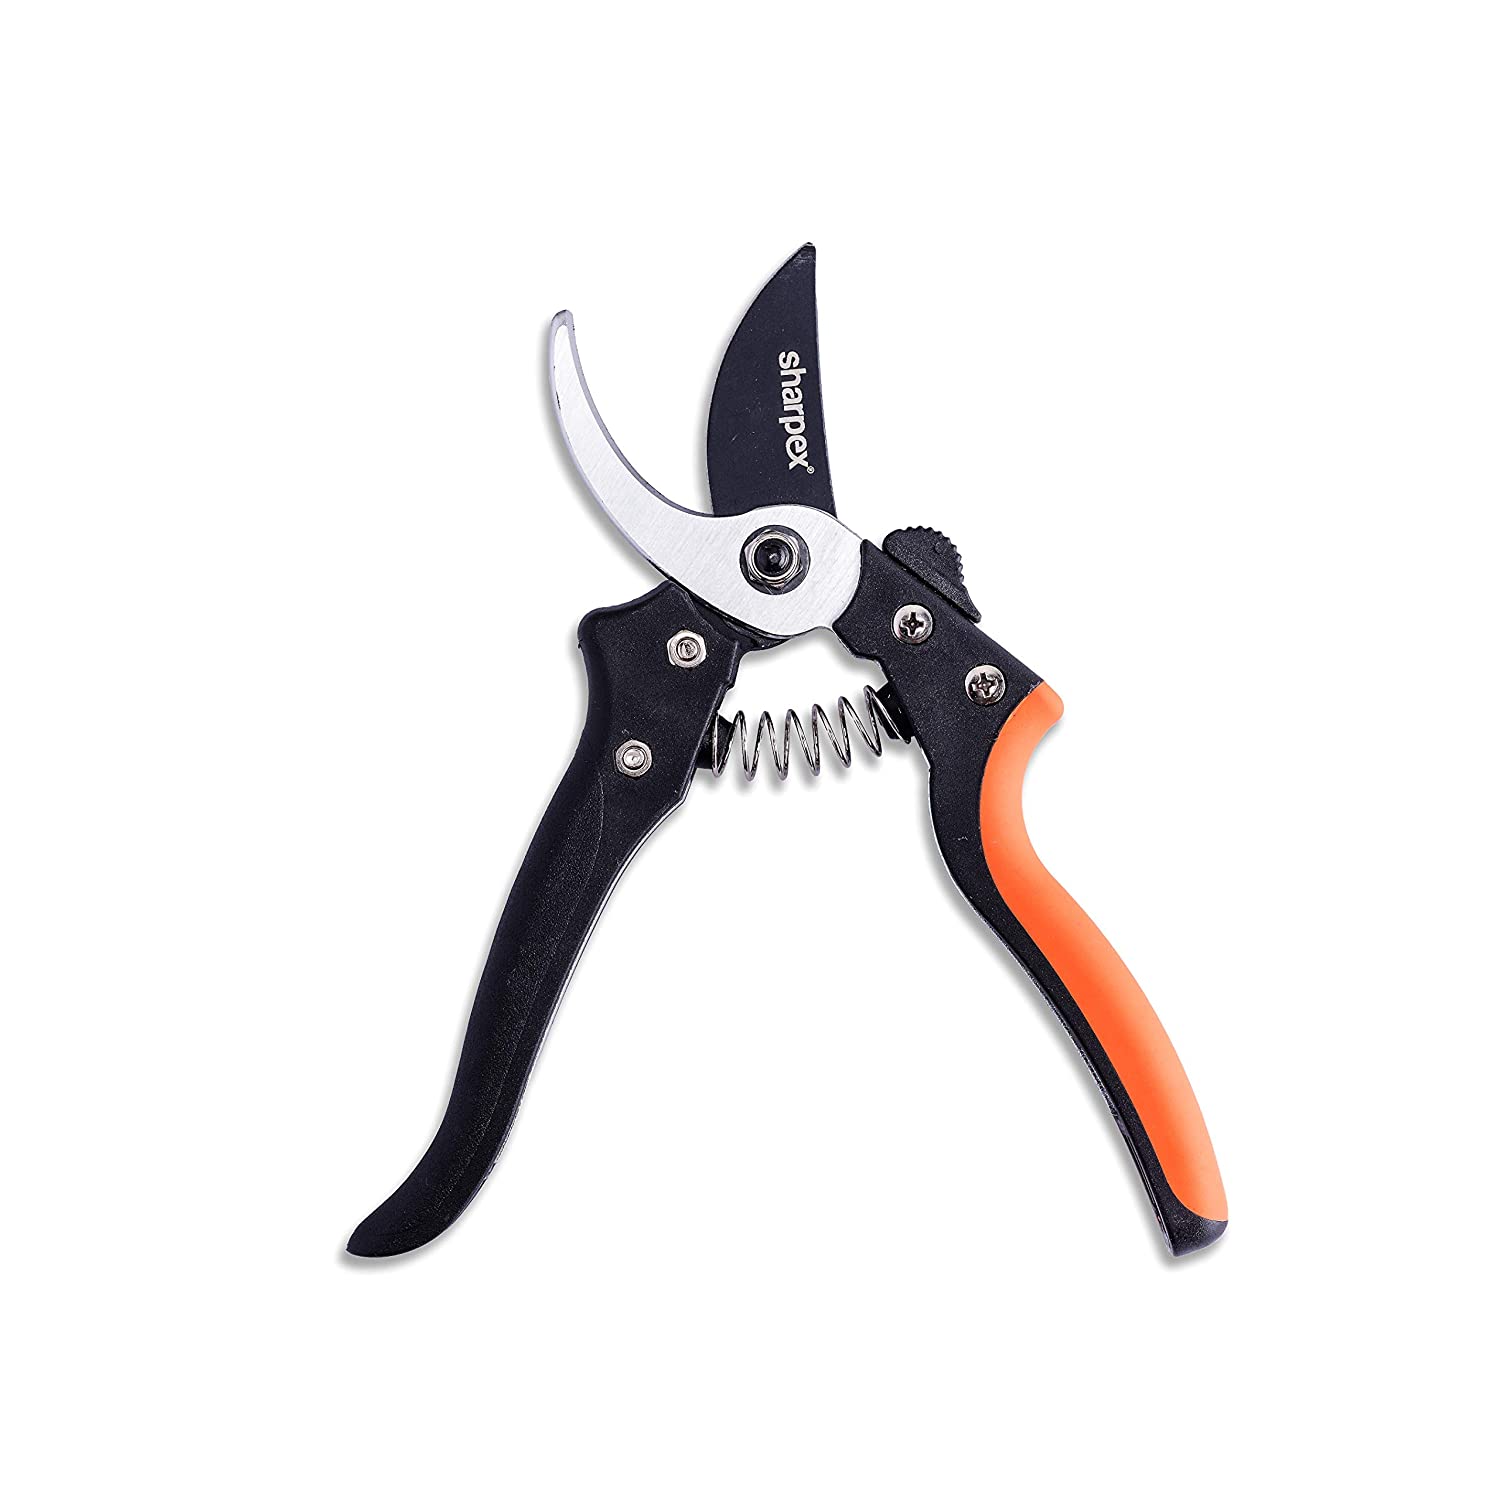 sharpex professional pruning shears bypass hand pruner less effort garden clipper with sharp blade and comfortable handle tree branch secateurs